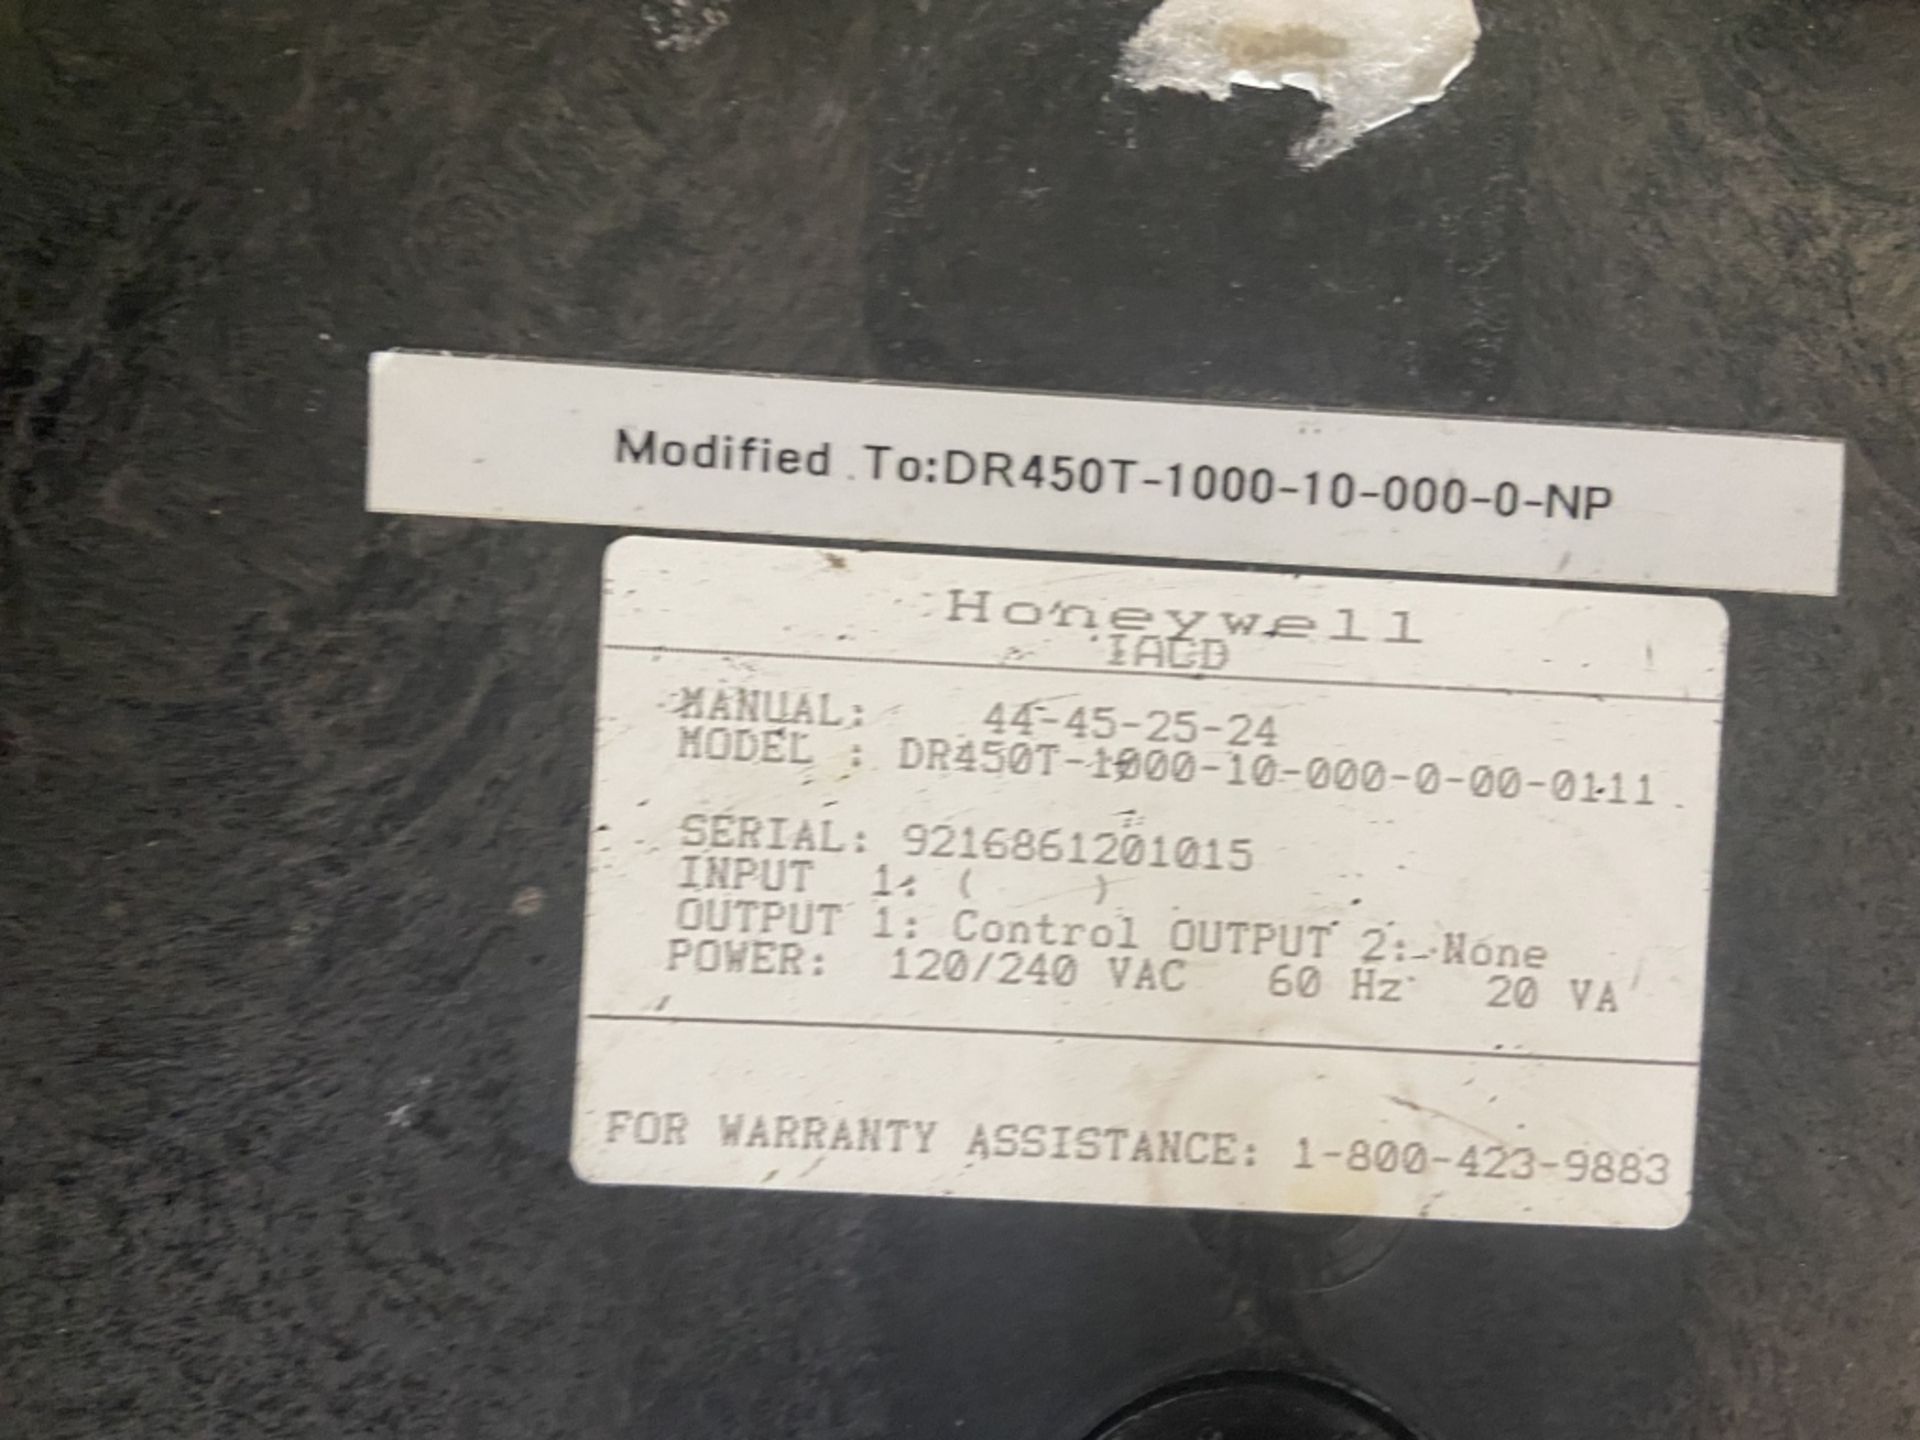 (2) Honeywell S/S Chart Recorders,M/N DR450T-1000-10-000-0-00-0111, 120/240 Volts (INV#82466)( - Image 3 of 3